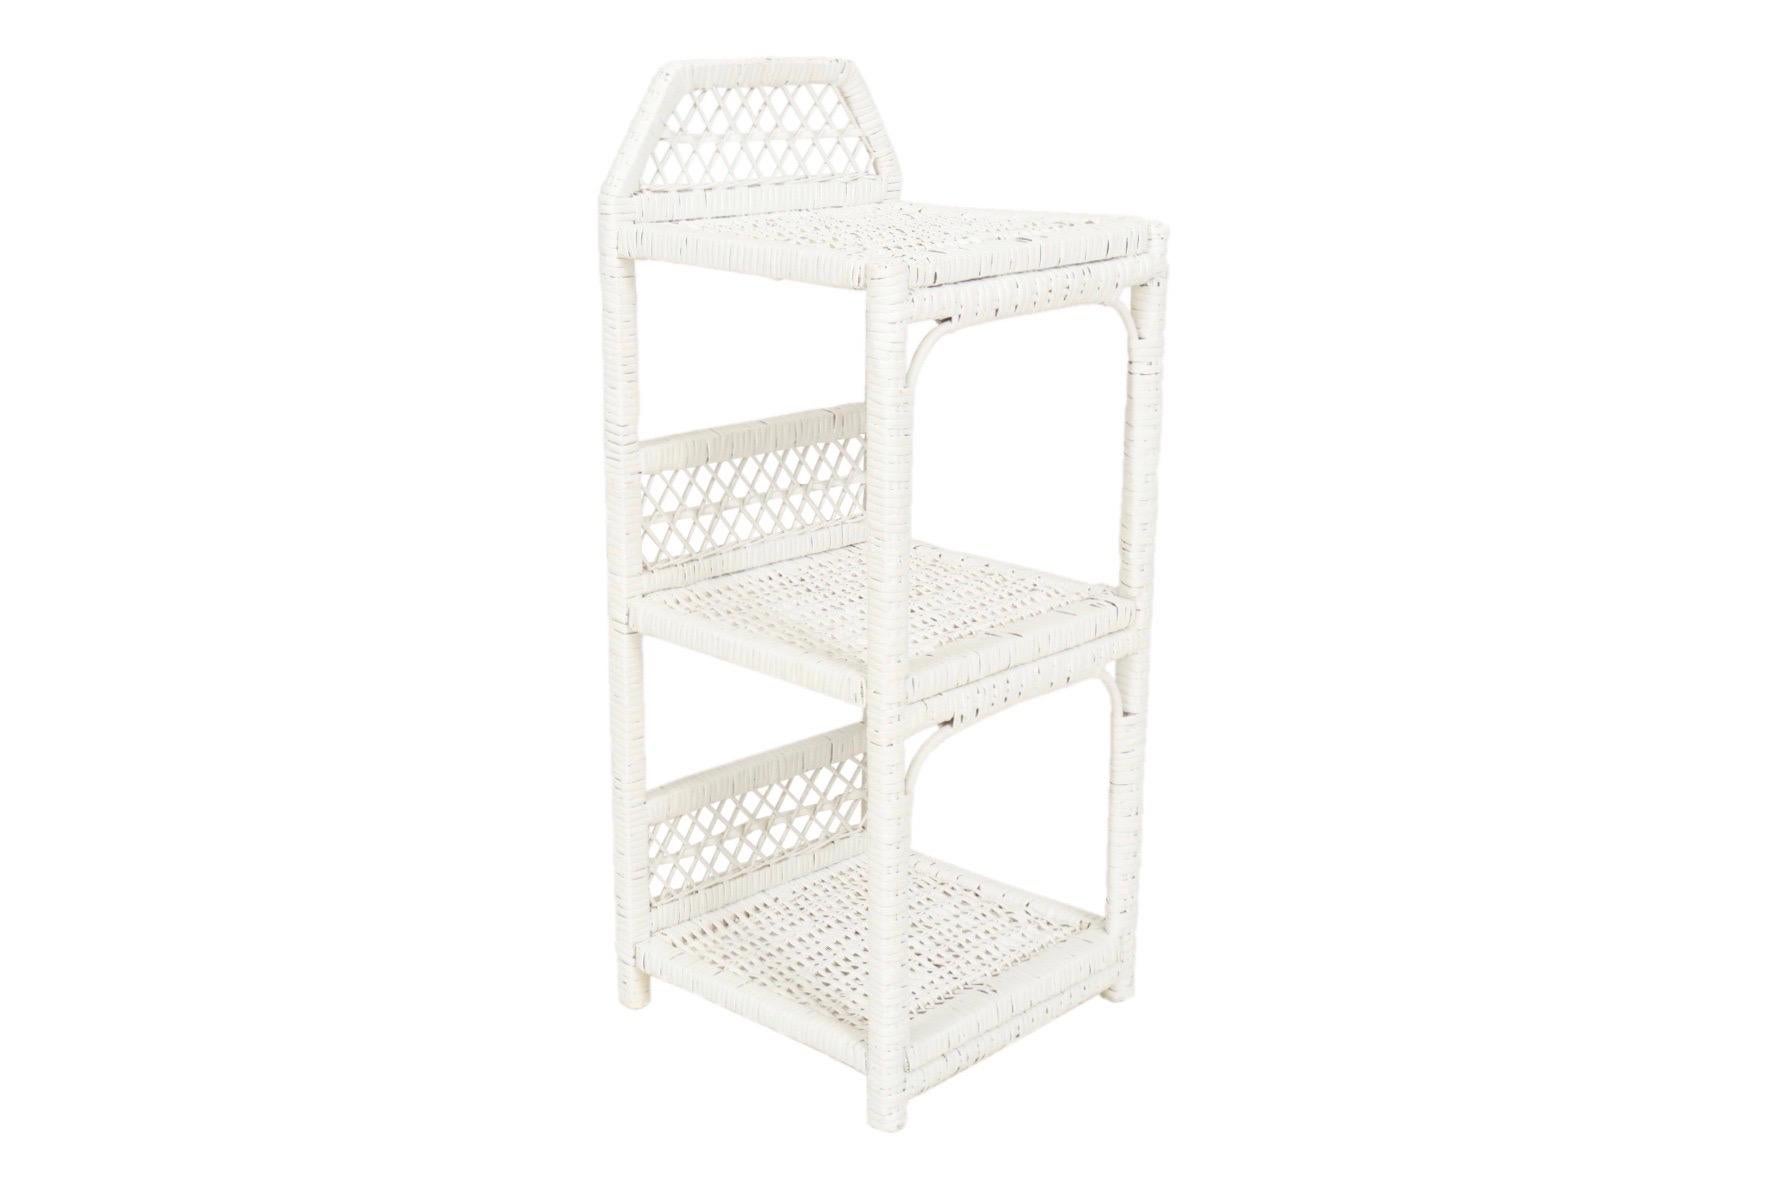 A small woven wicker étagère with three shelves in white. Each shelf has a back rail decorated with an open lattice weave.